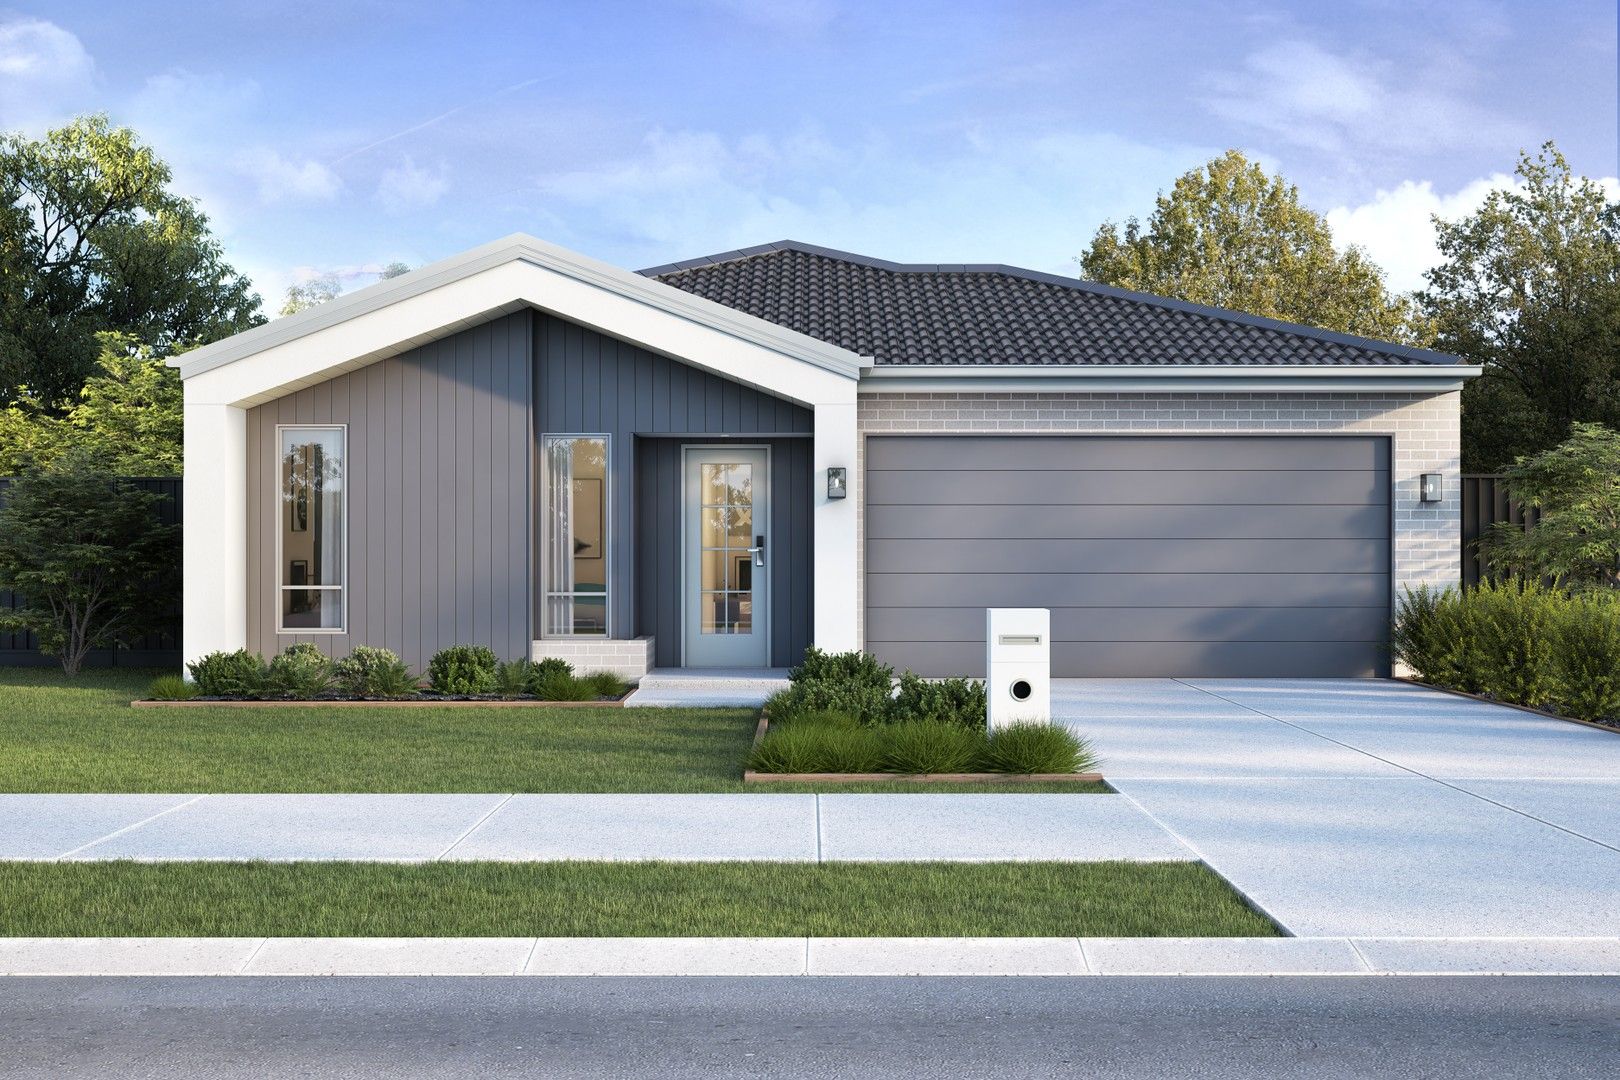 4 bedrooms New House & Land in Lot 2177 Drum Street MAMBOURIN VIC, 3024